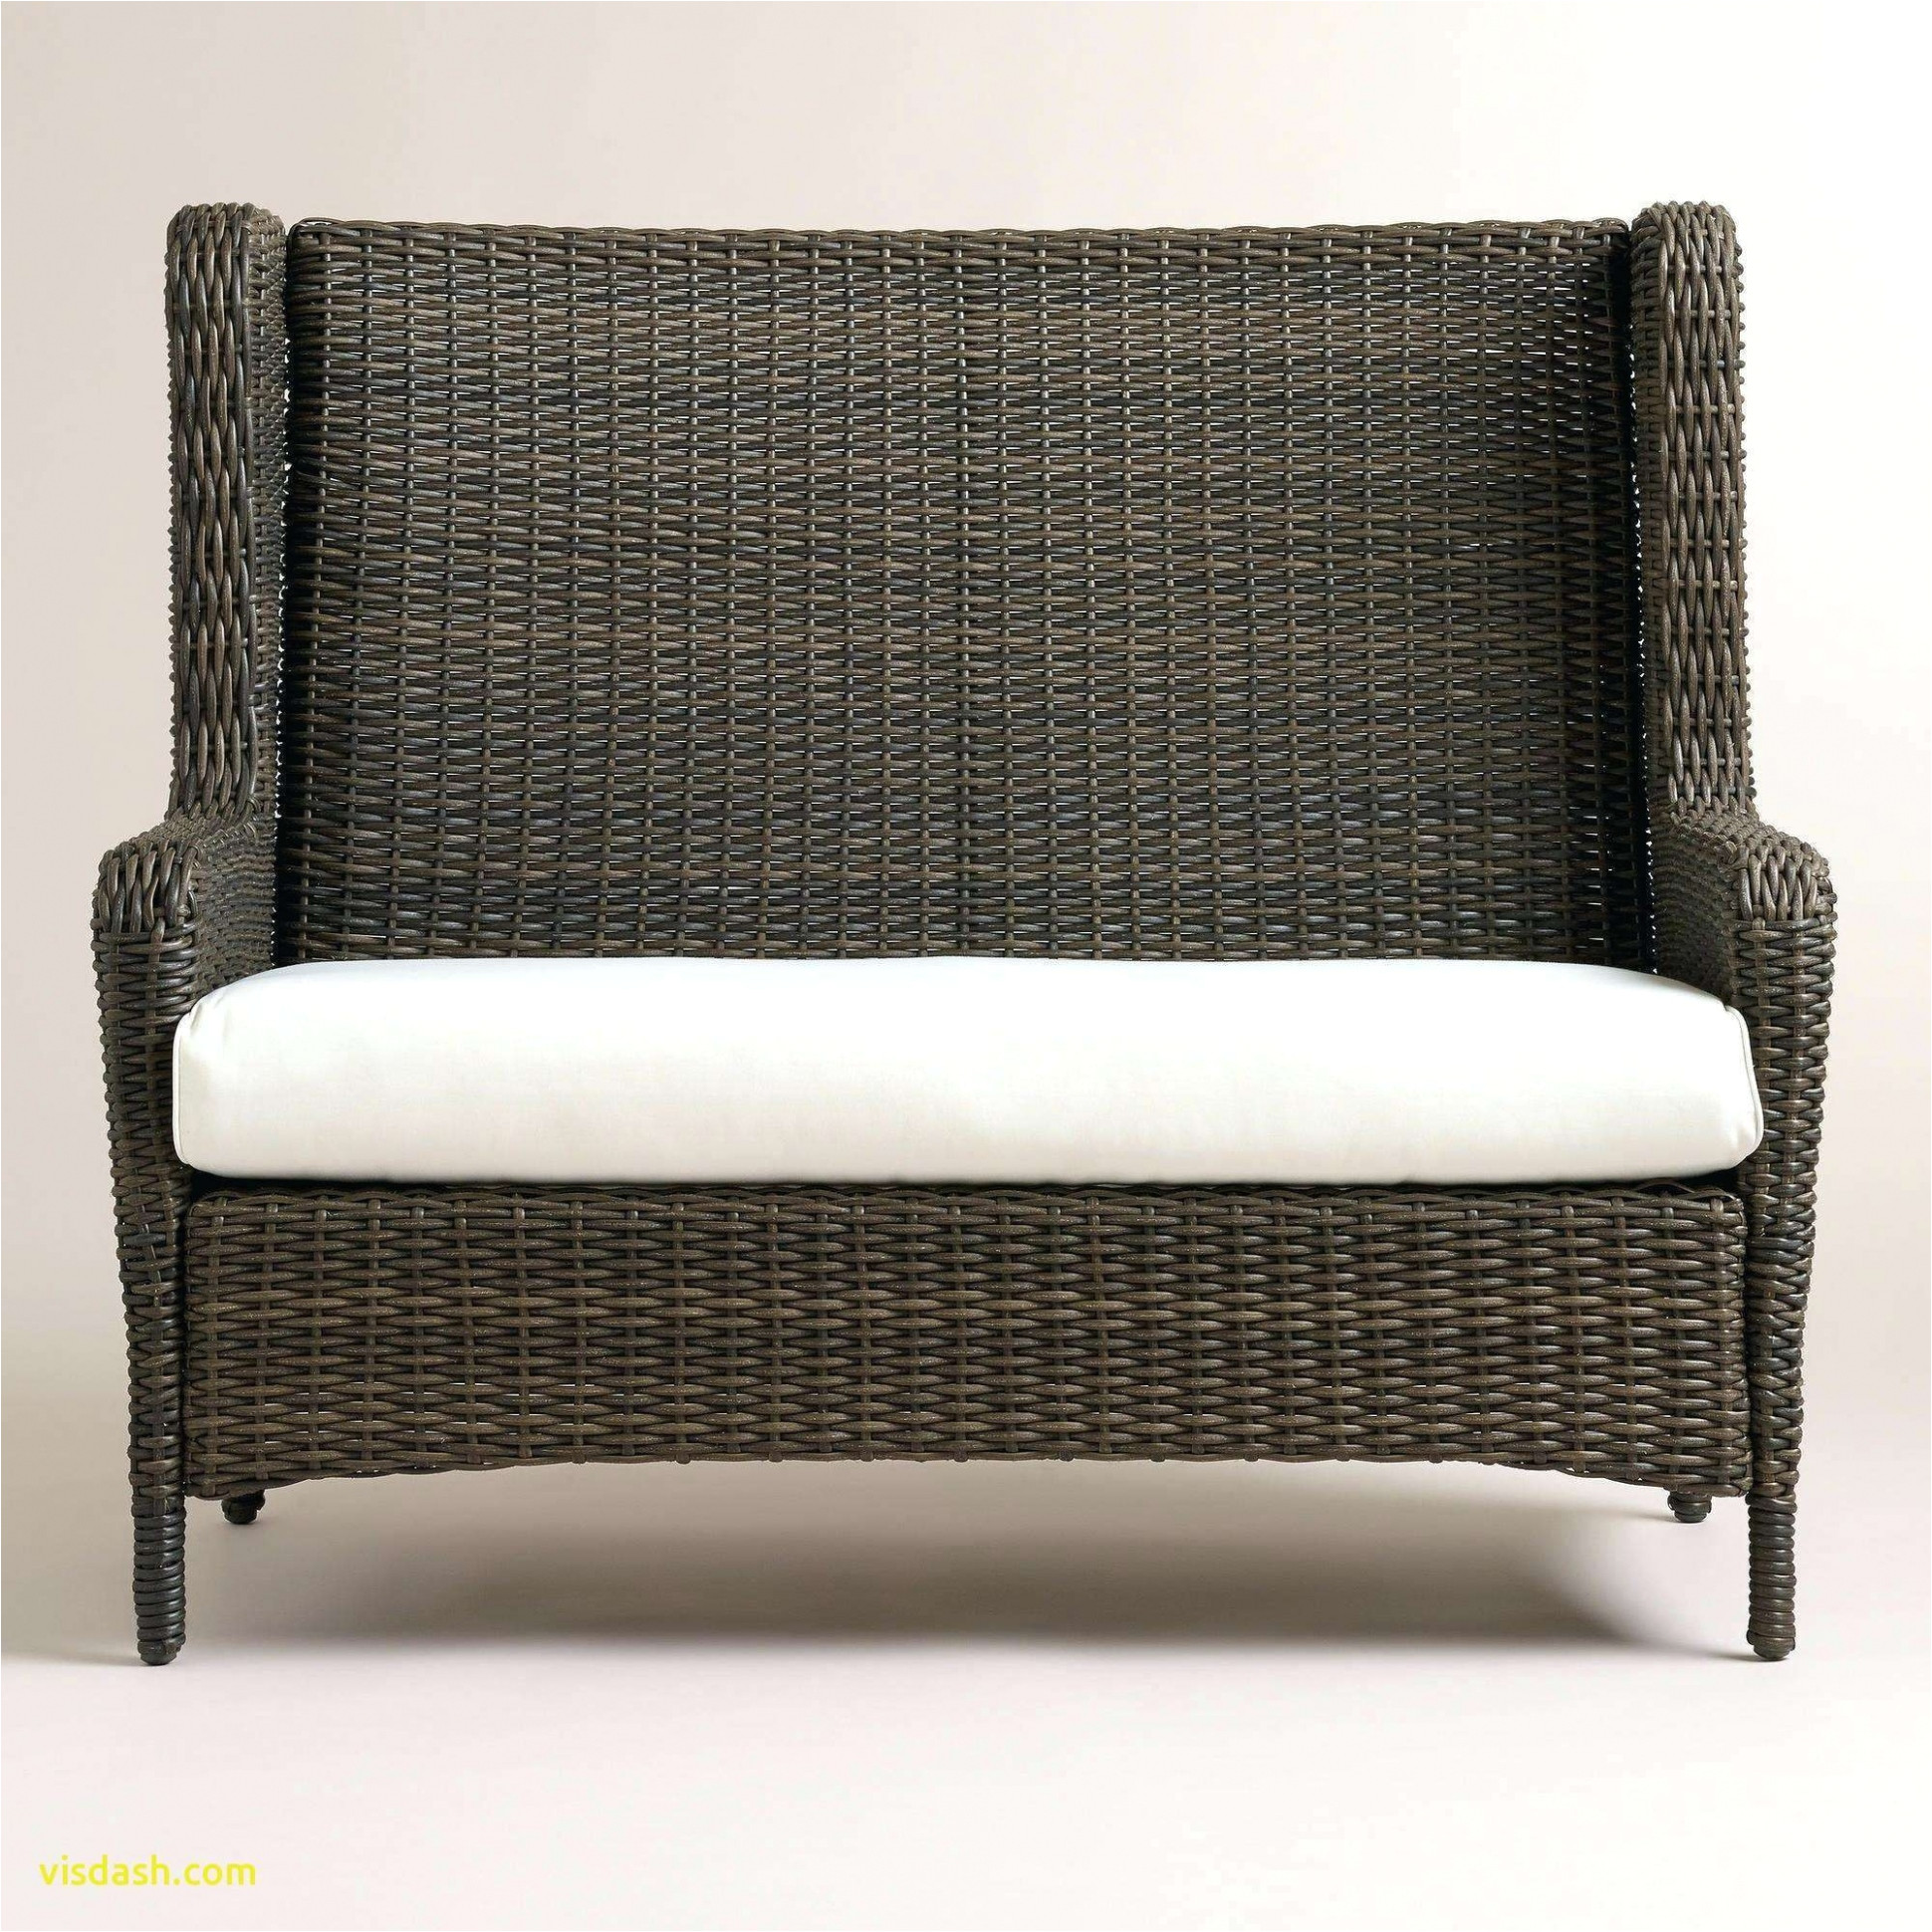 wicker egg chair inspirational patio egg chair beautiful wicker outdoor sofa 0d patio chairs sale of